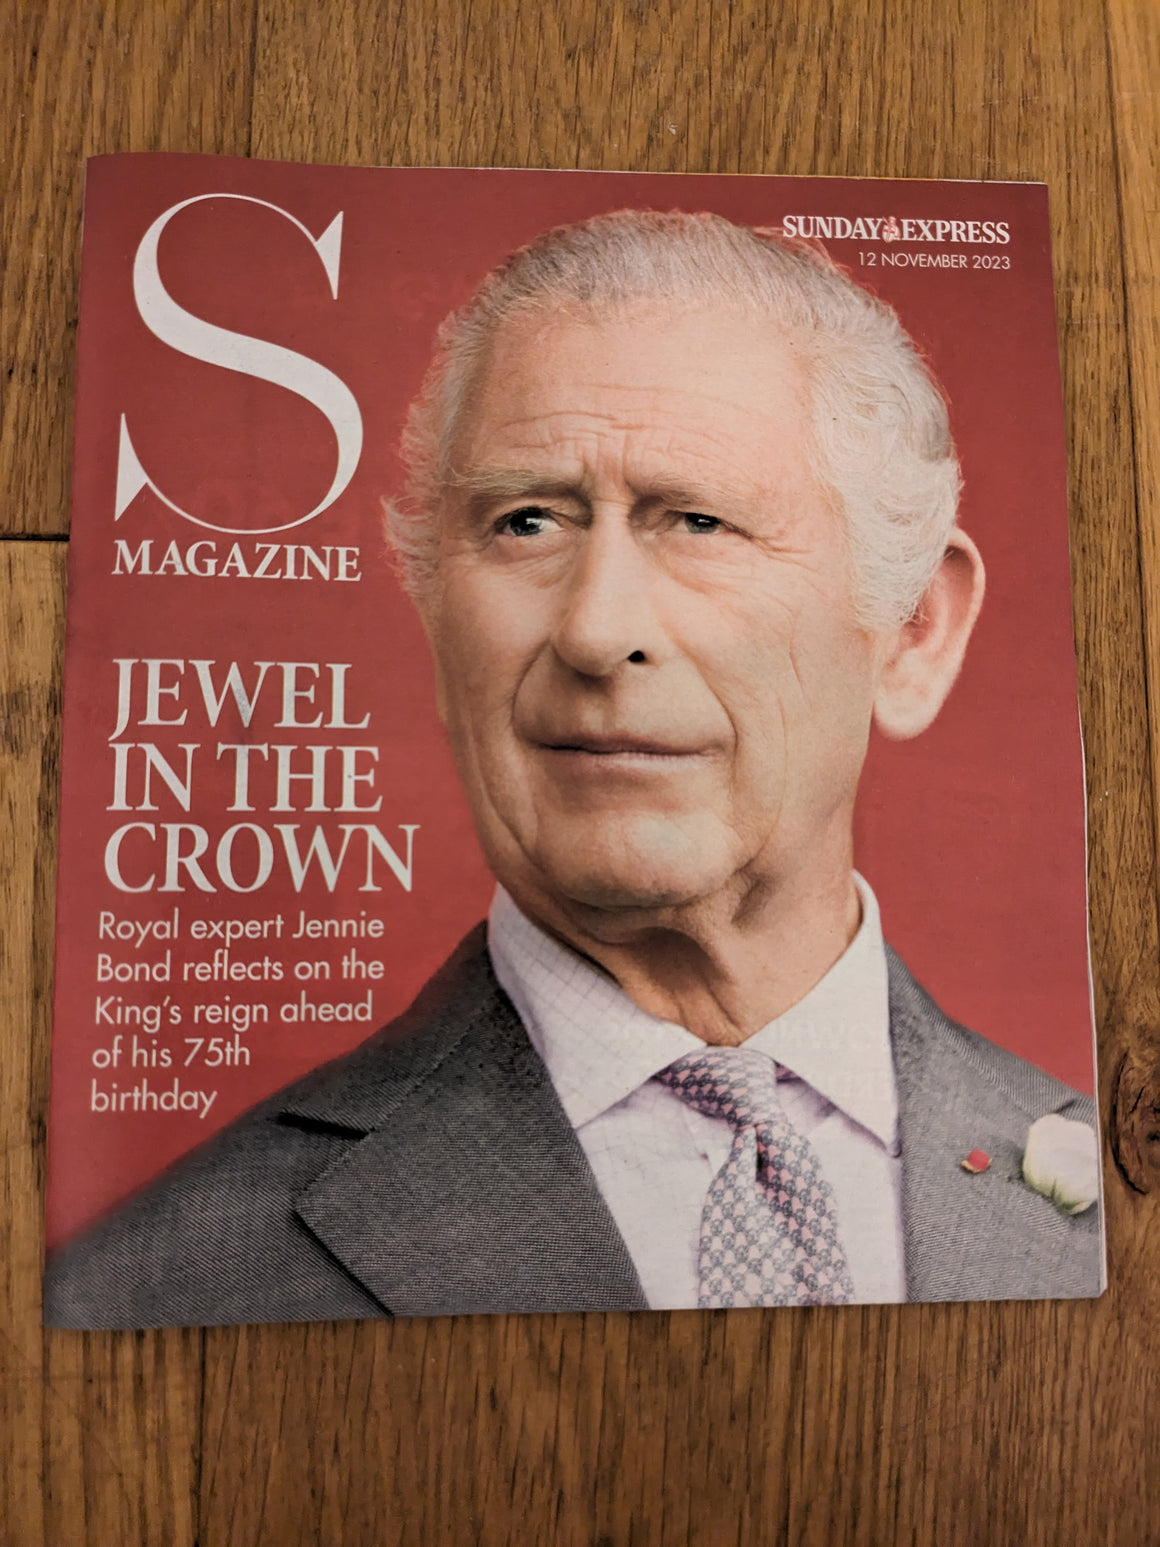 S EXPRESS Magazine 12/11/2023 KING CHARLES III COVER FEATURE